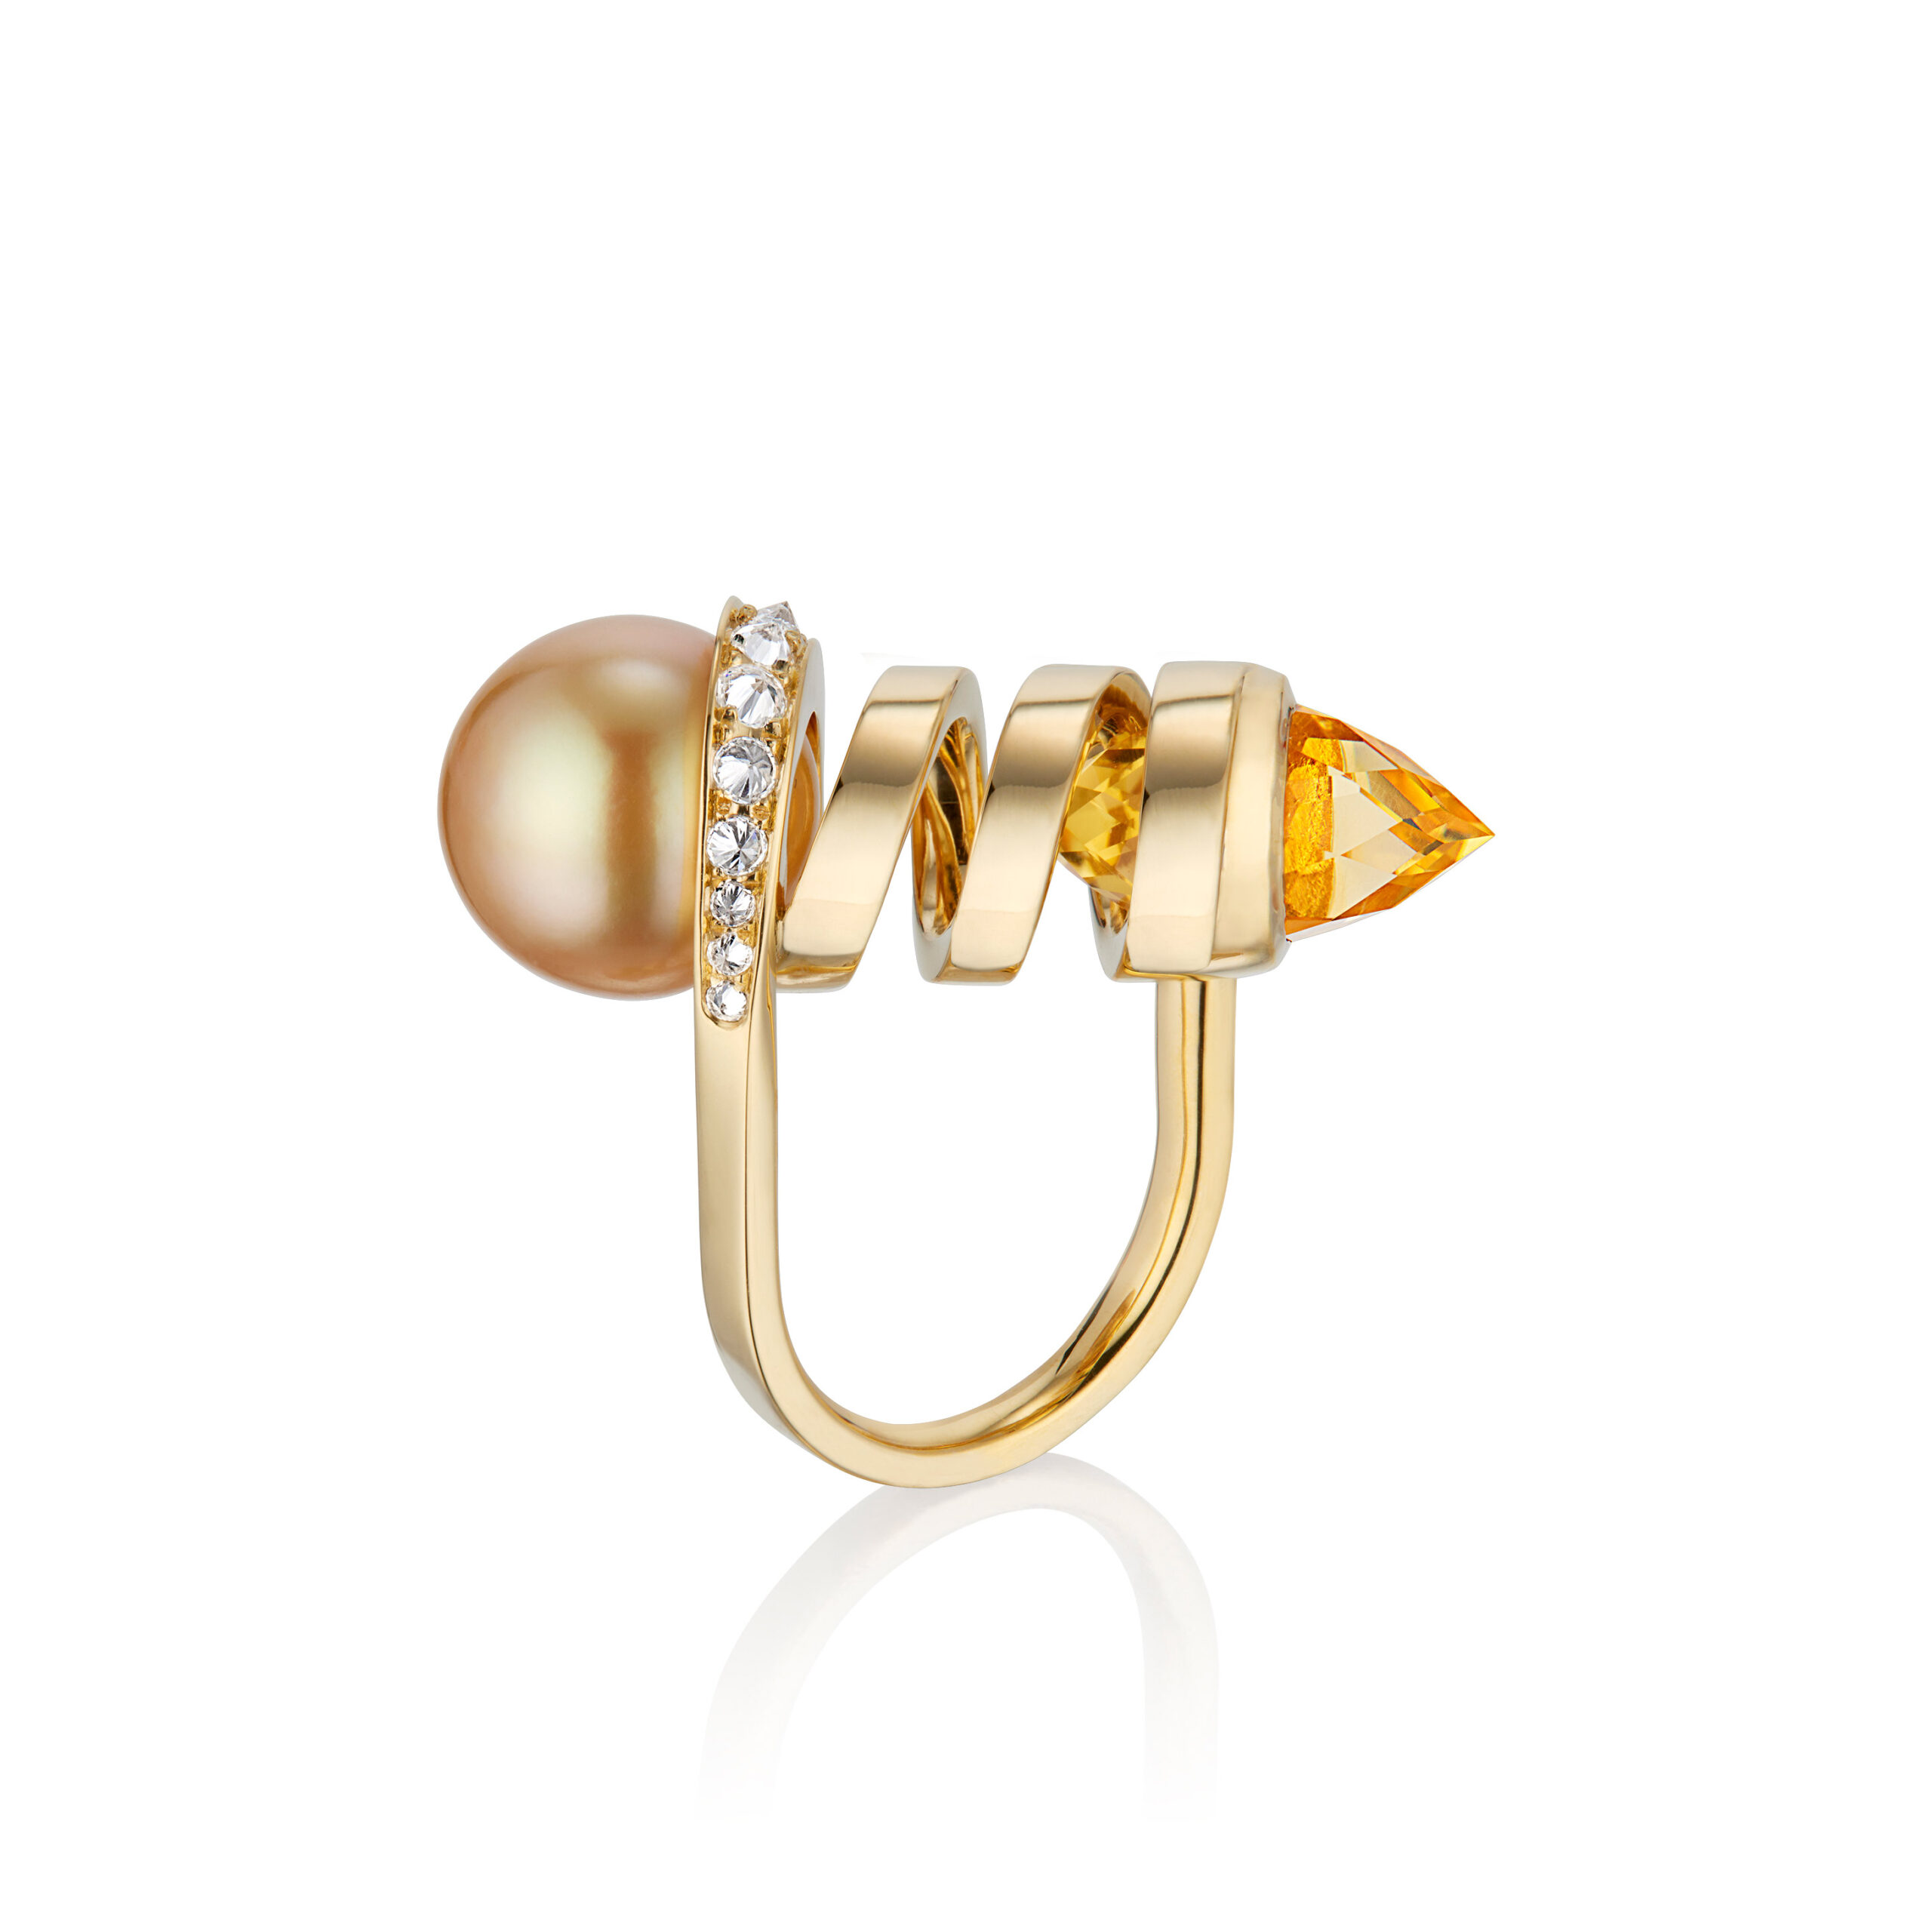 This a profile view of the Renisis Bullet Stone Curl Ring designed by artist Sardwell. It is crafted in18K yellow gold with inverted diamonds and one golden South Sea Pearl and faceted Citrine bullet stone.